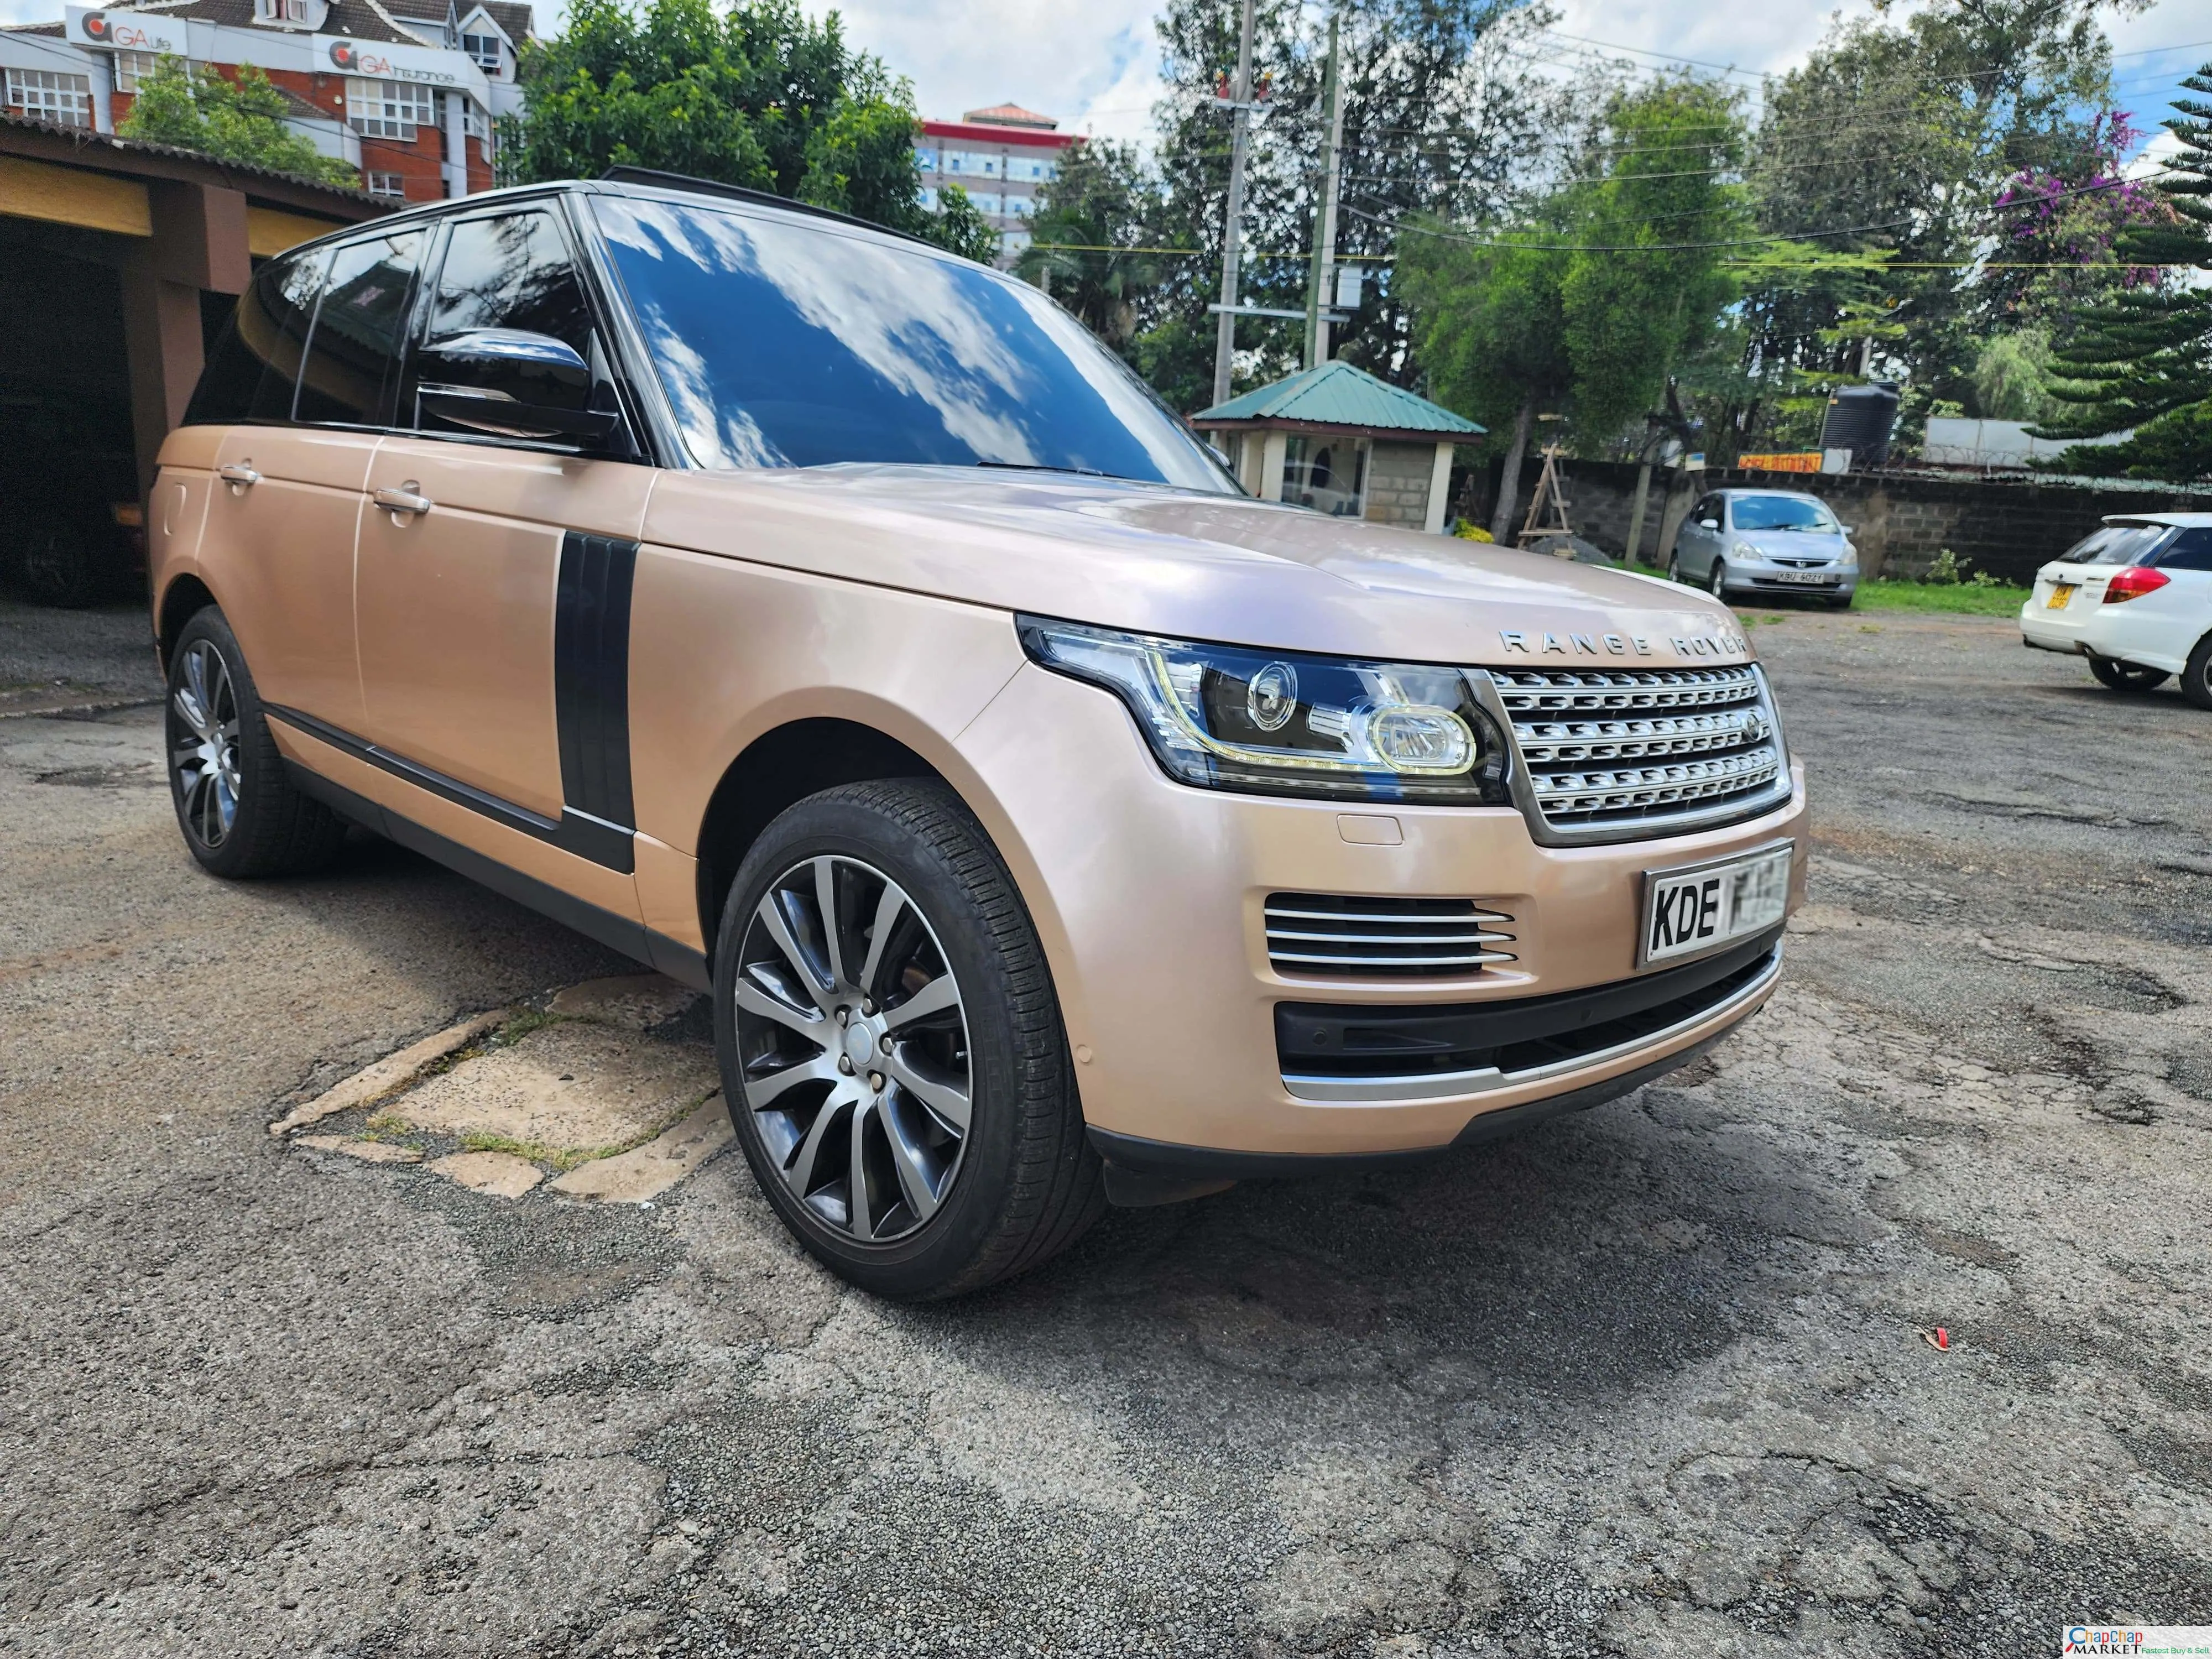 RANGE ROVER VOGUE JUST ARRIVED You Pay 40% DEPOSIT TRADE IN OK For sale in kenya exclusive 2017